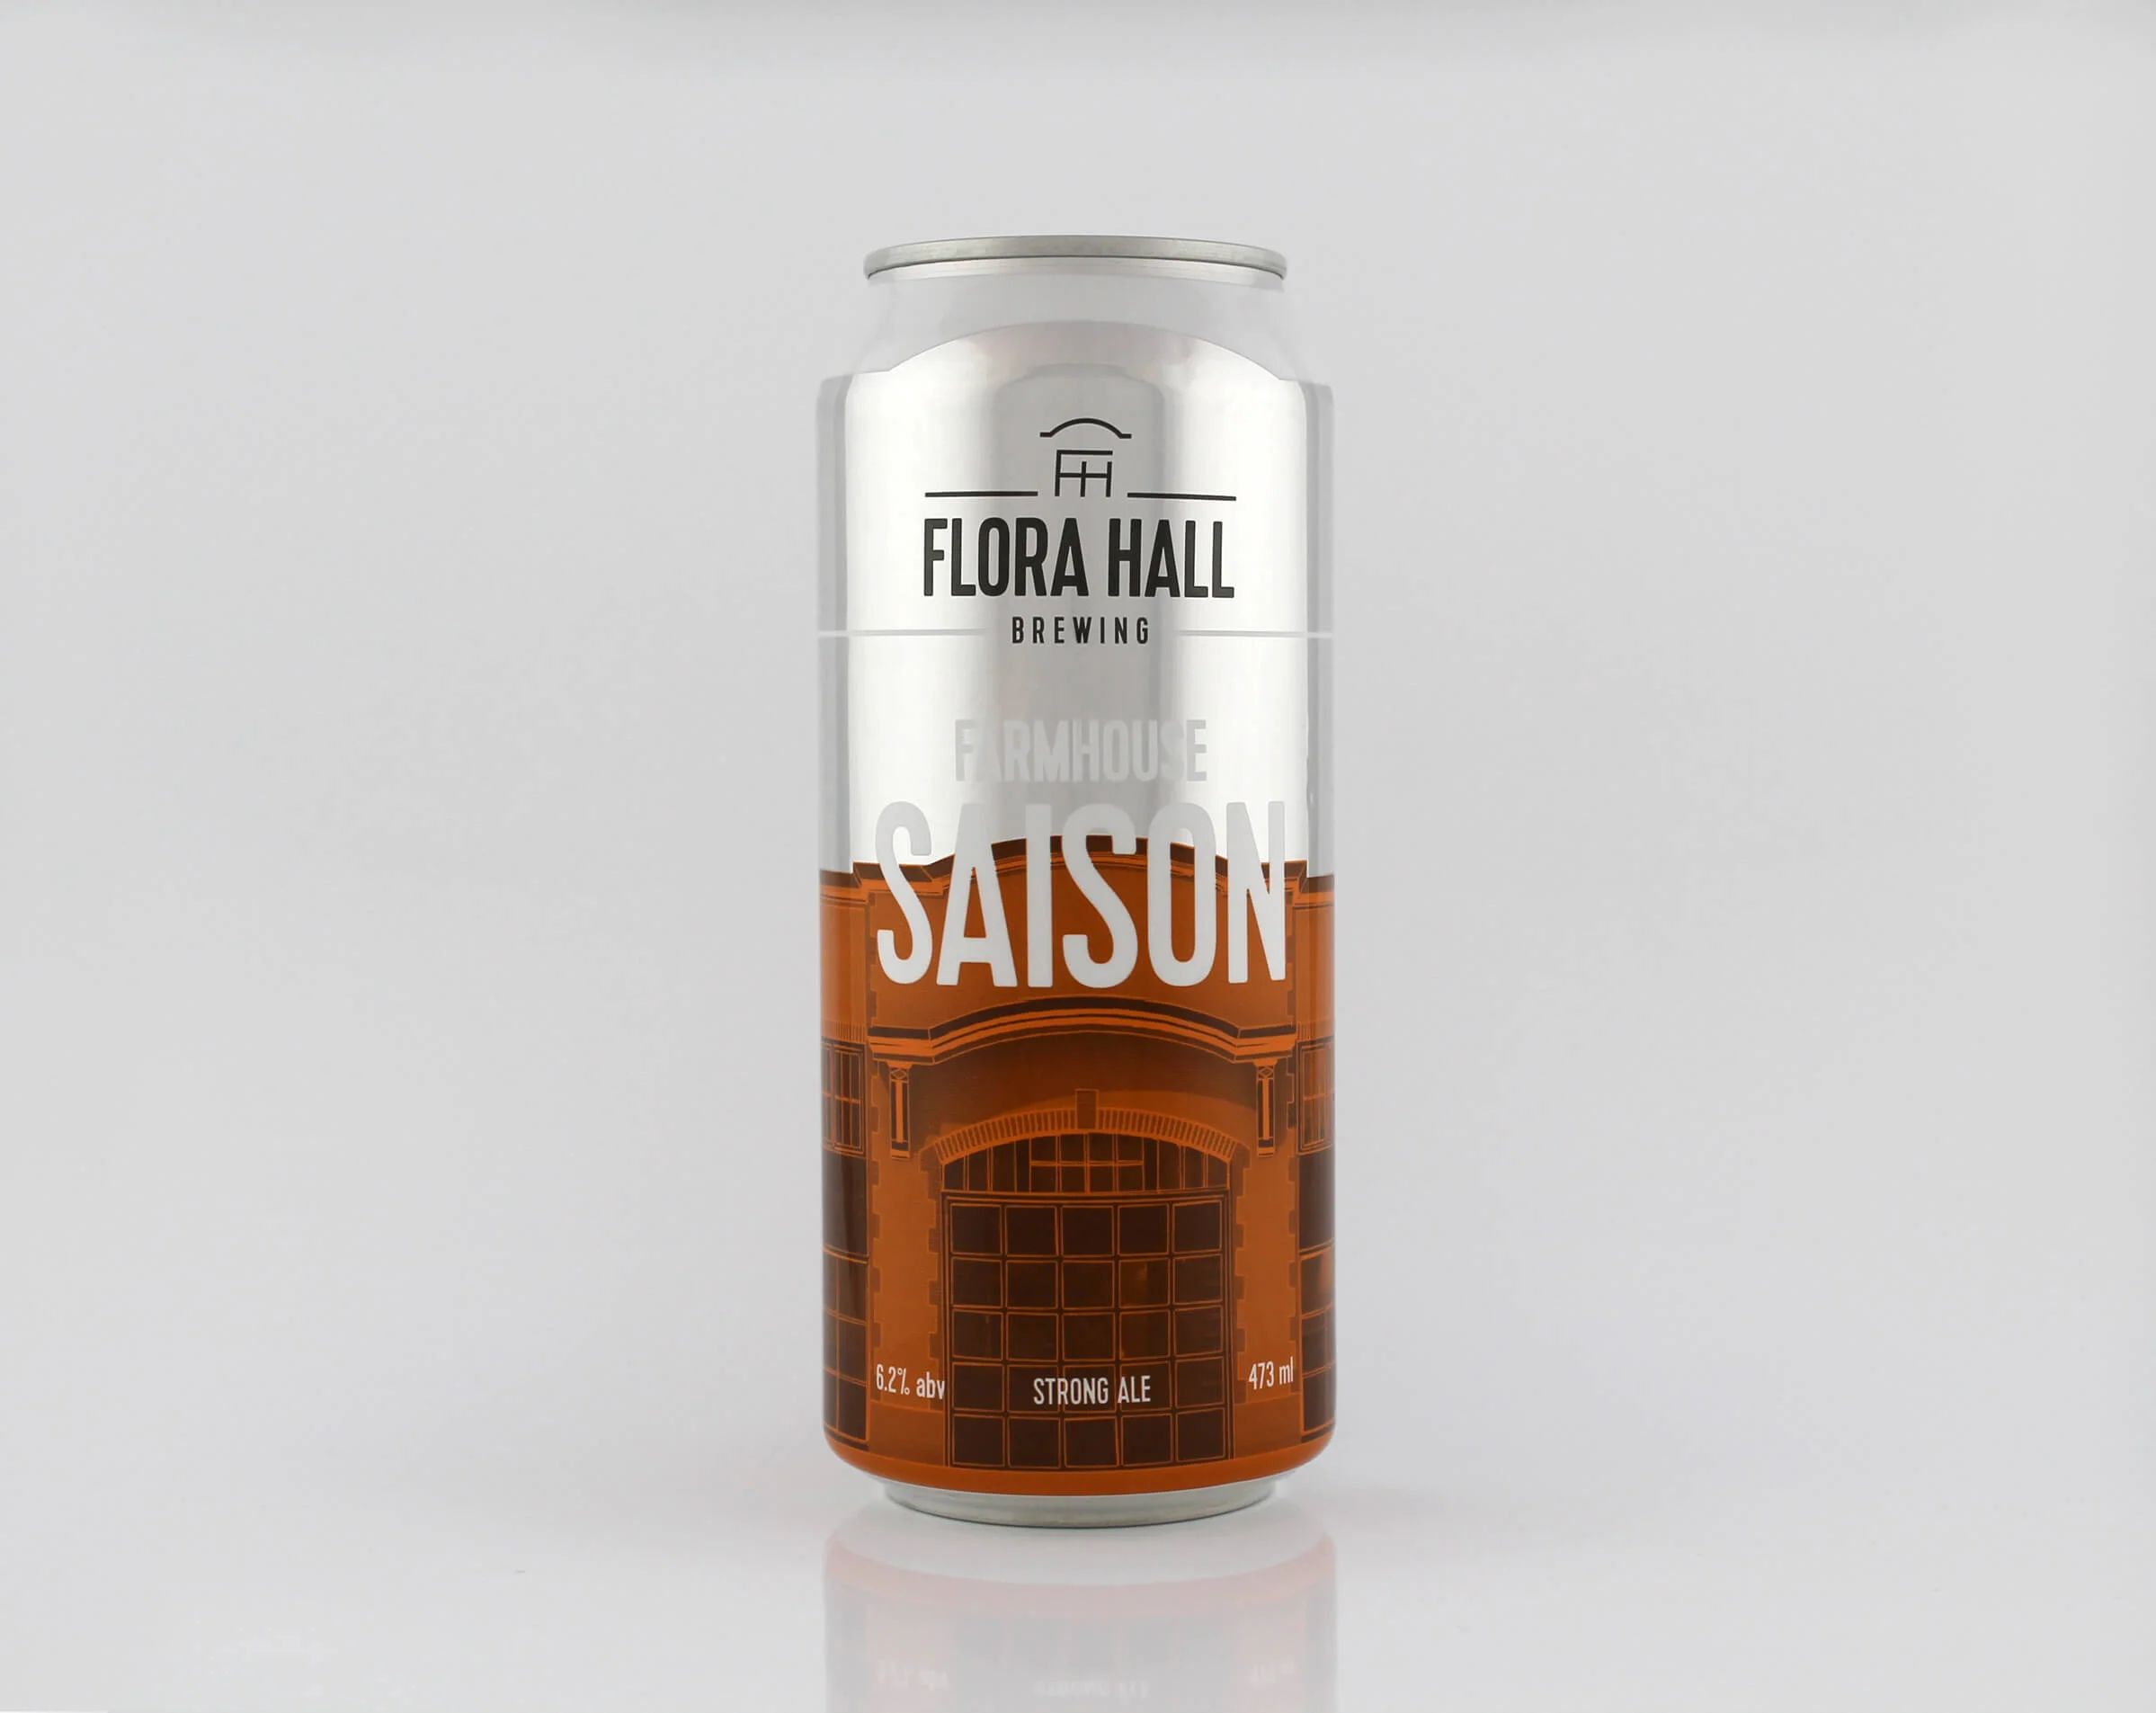 Beer can design for Flora Hall Brewing by Ottawa graphic designer idApostle